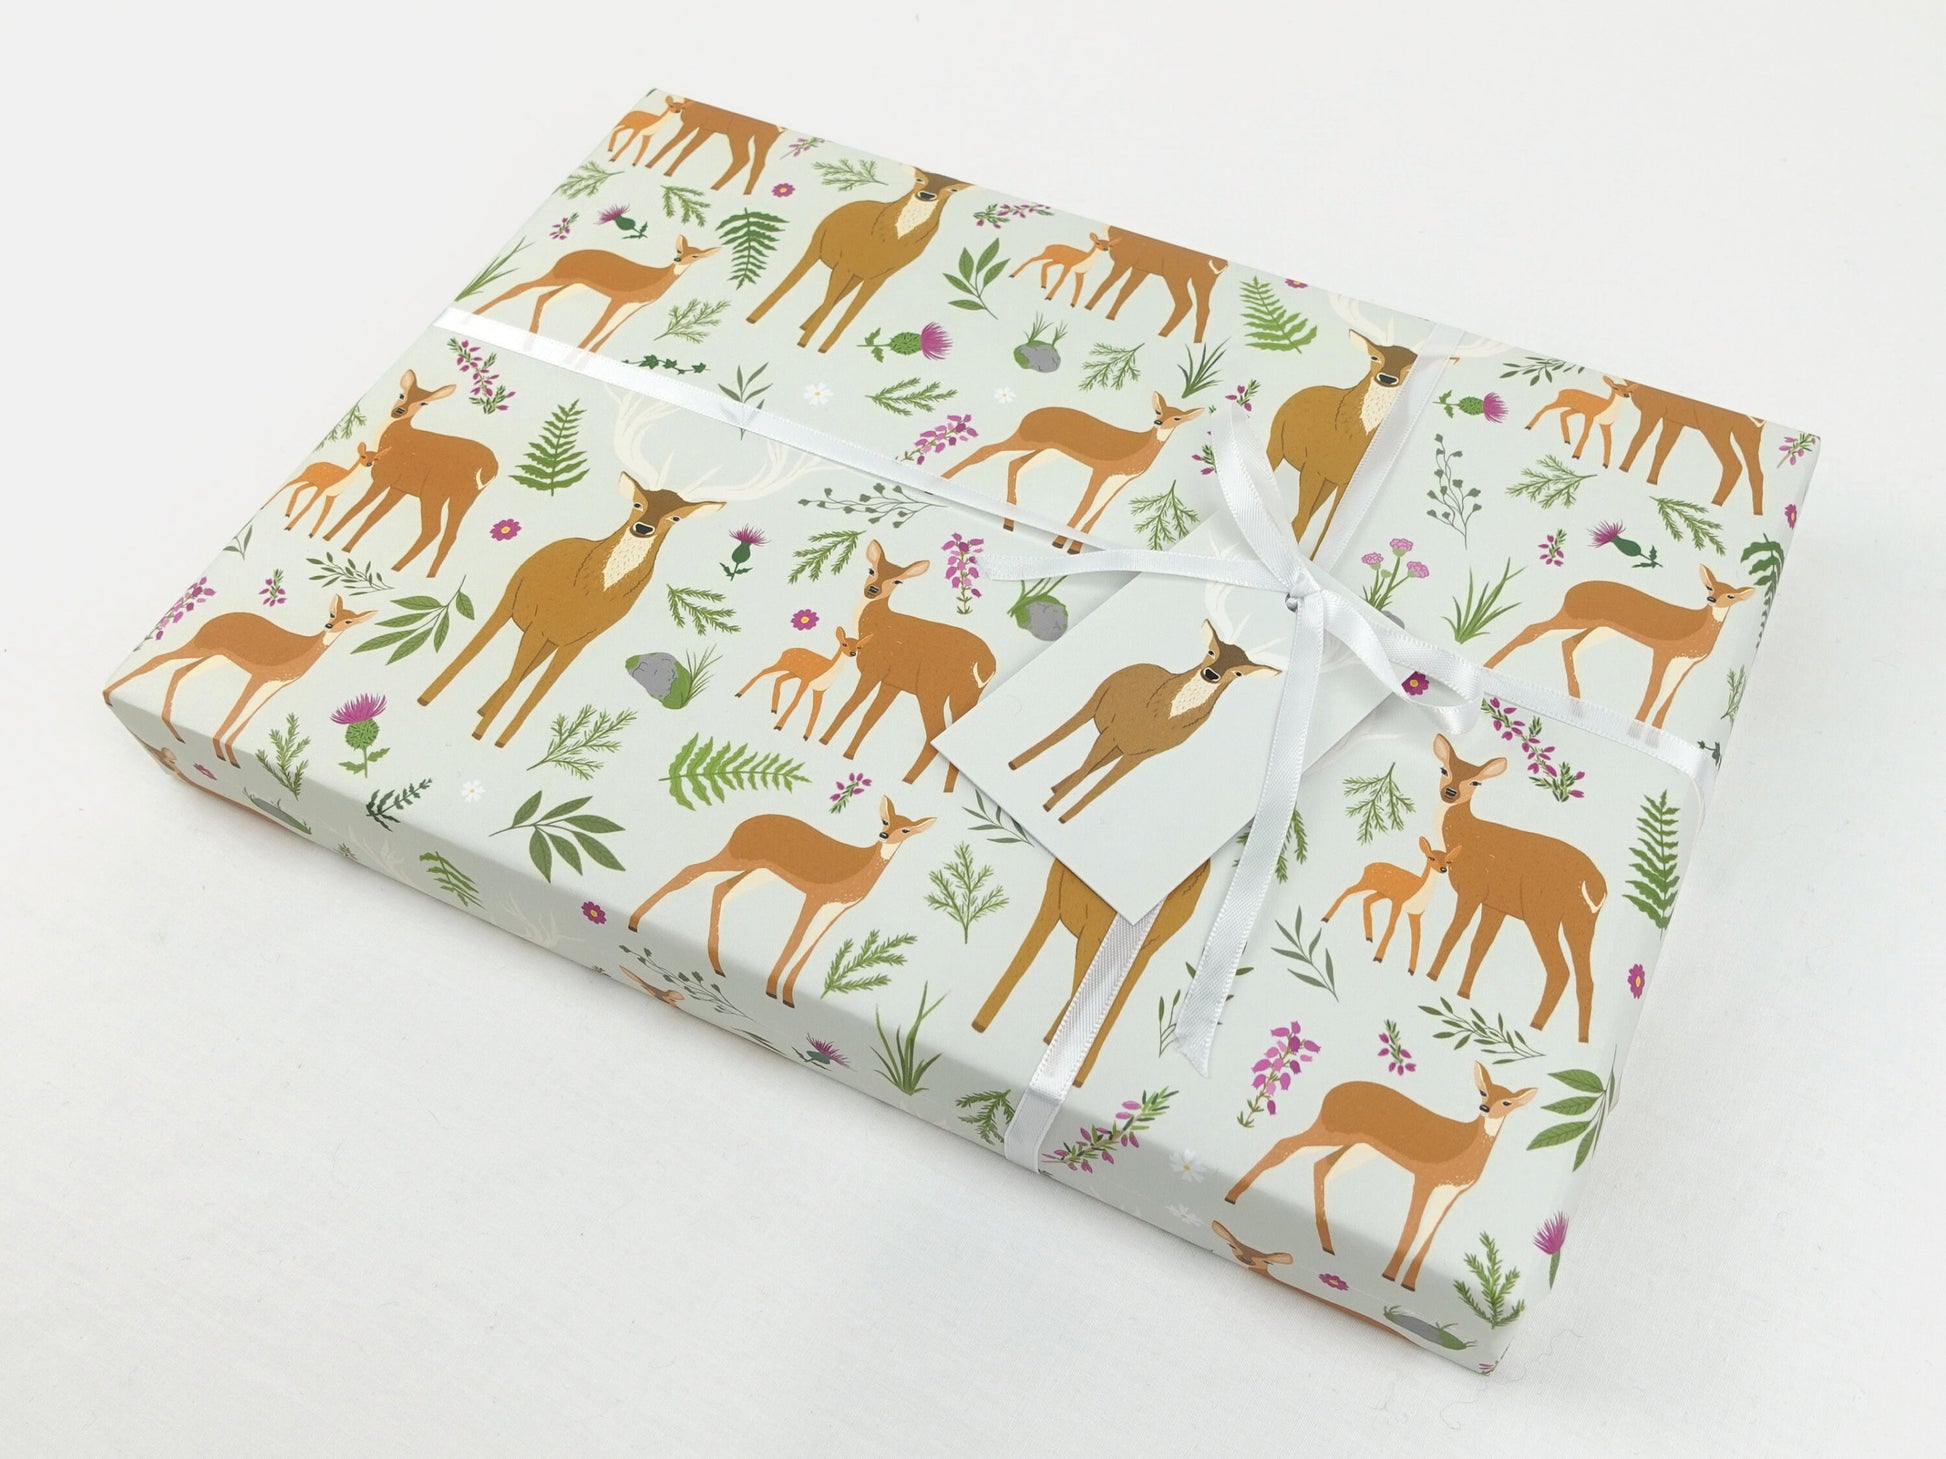 Stag / Deer wrapping paper | Scottish highlands eco friendly gift wrap | Premium quality sheets + Tags | Zero plastic packaging 70x50cm